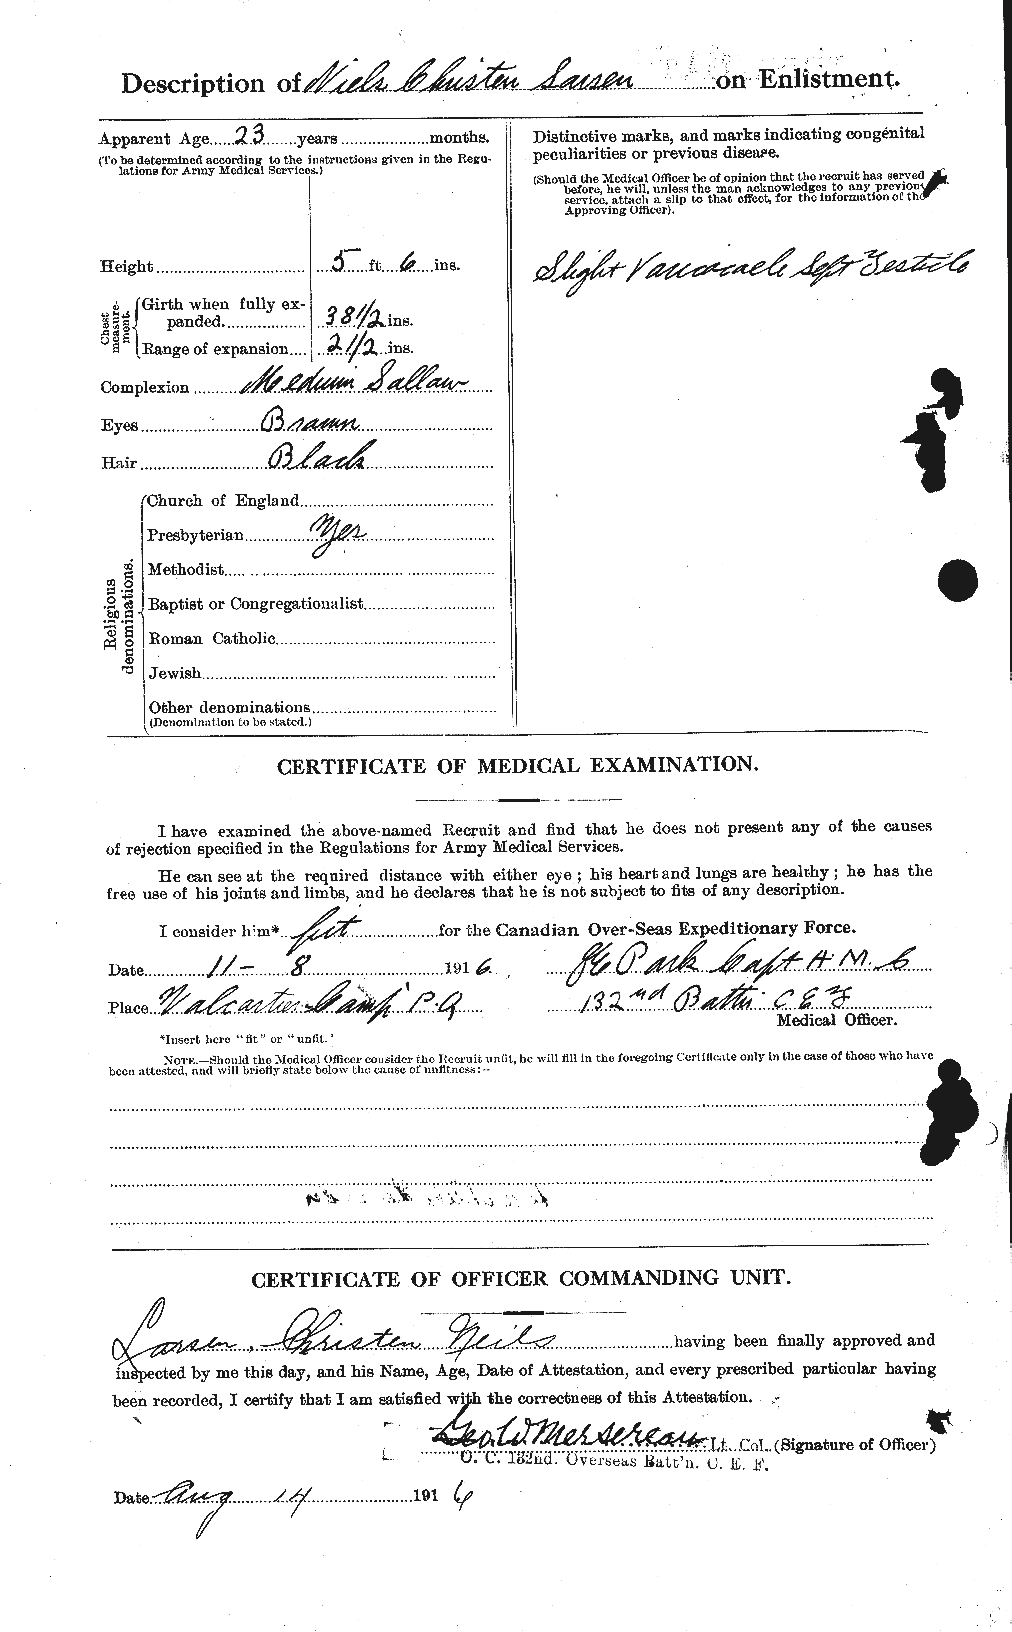 Personnel Records of the First World War - CEF 449073b